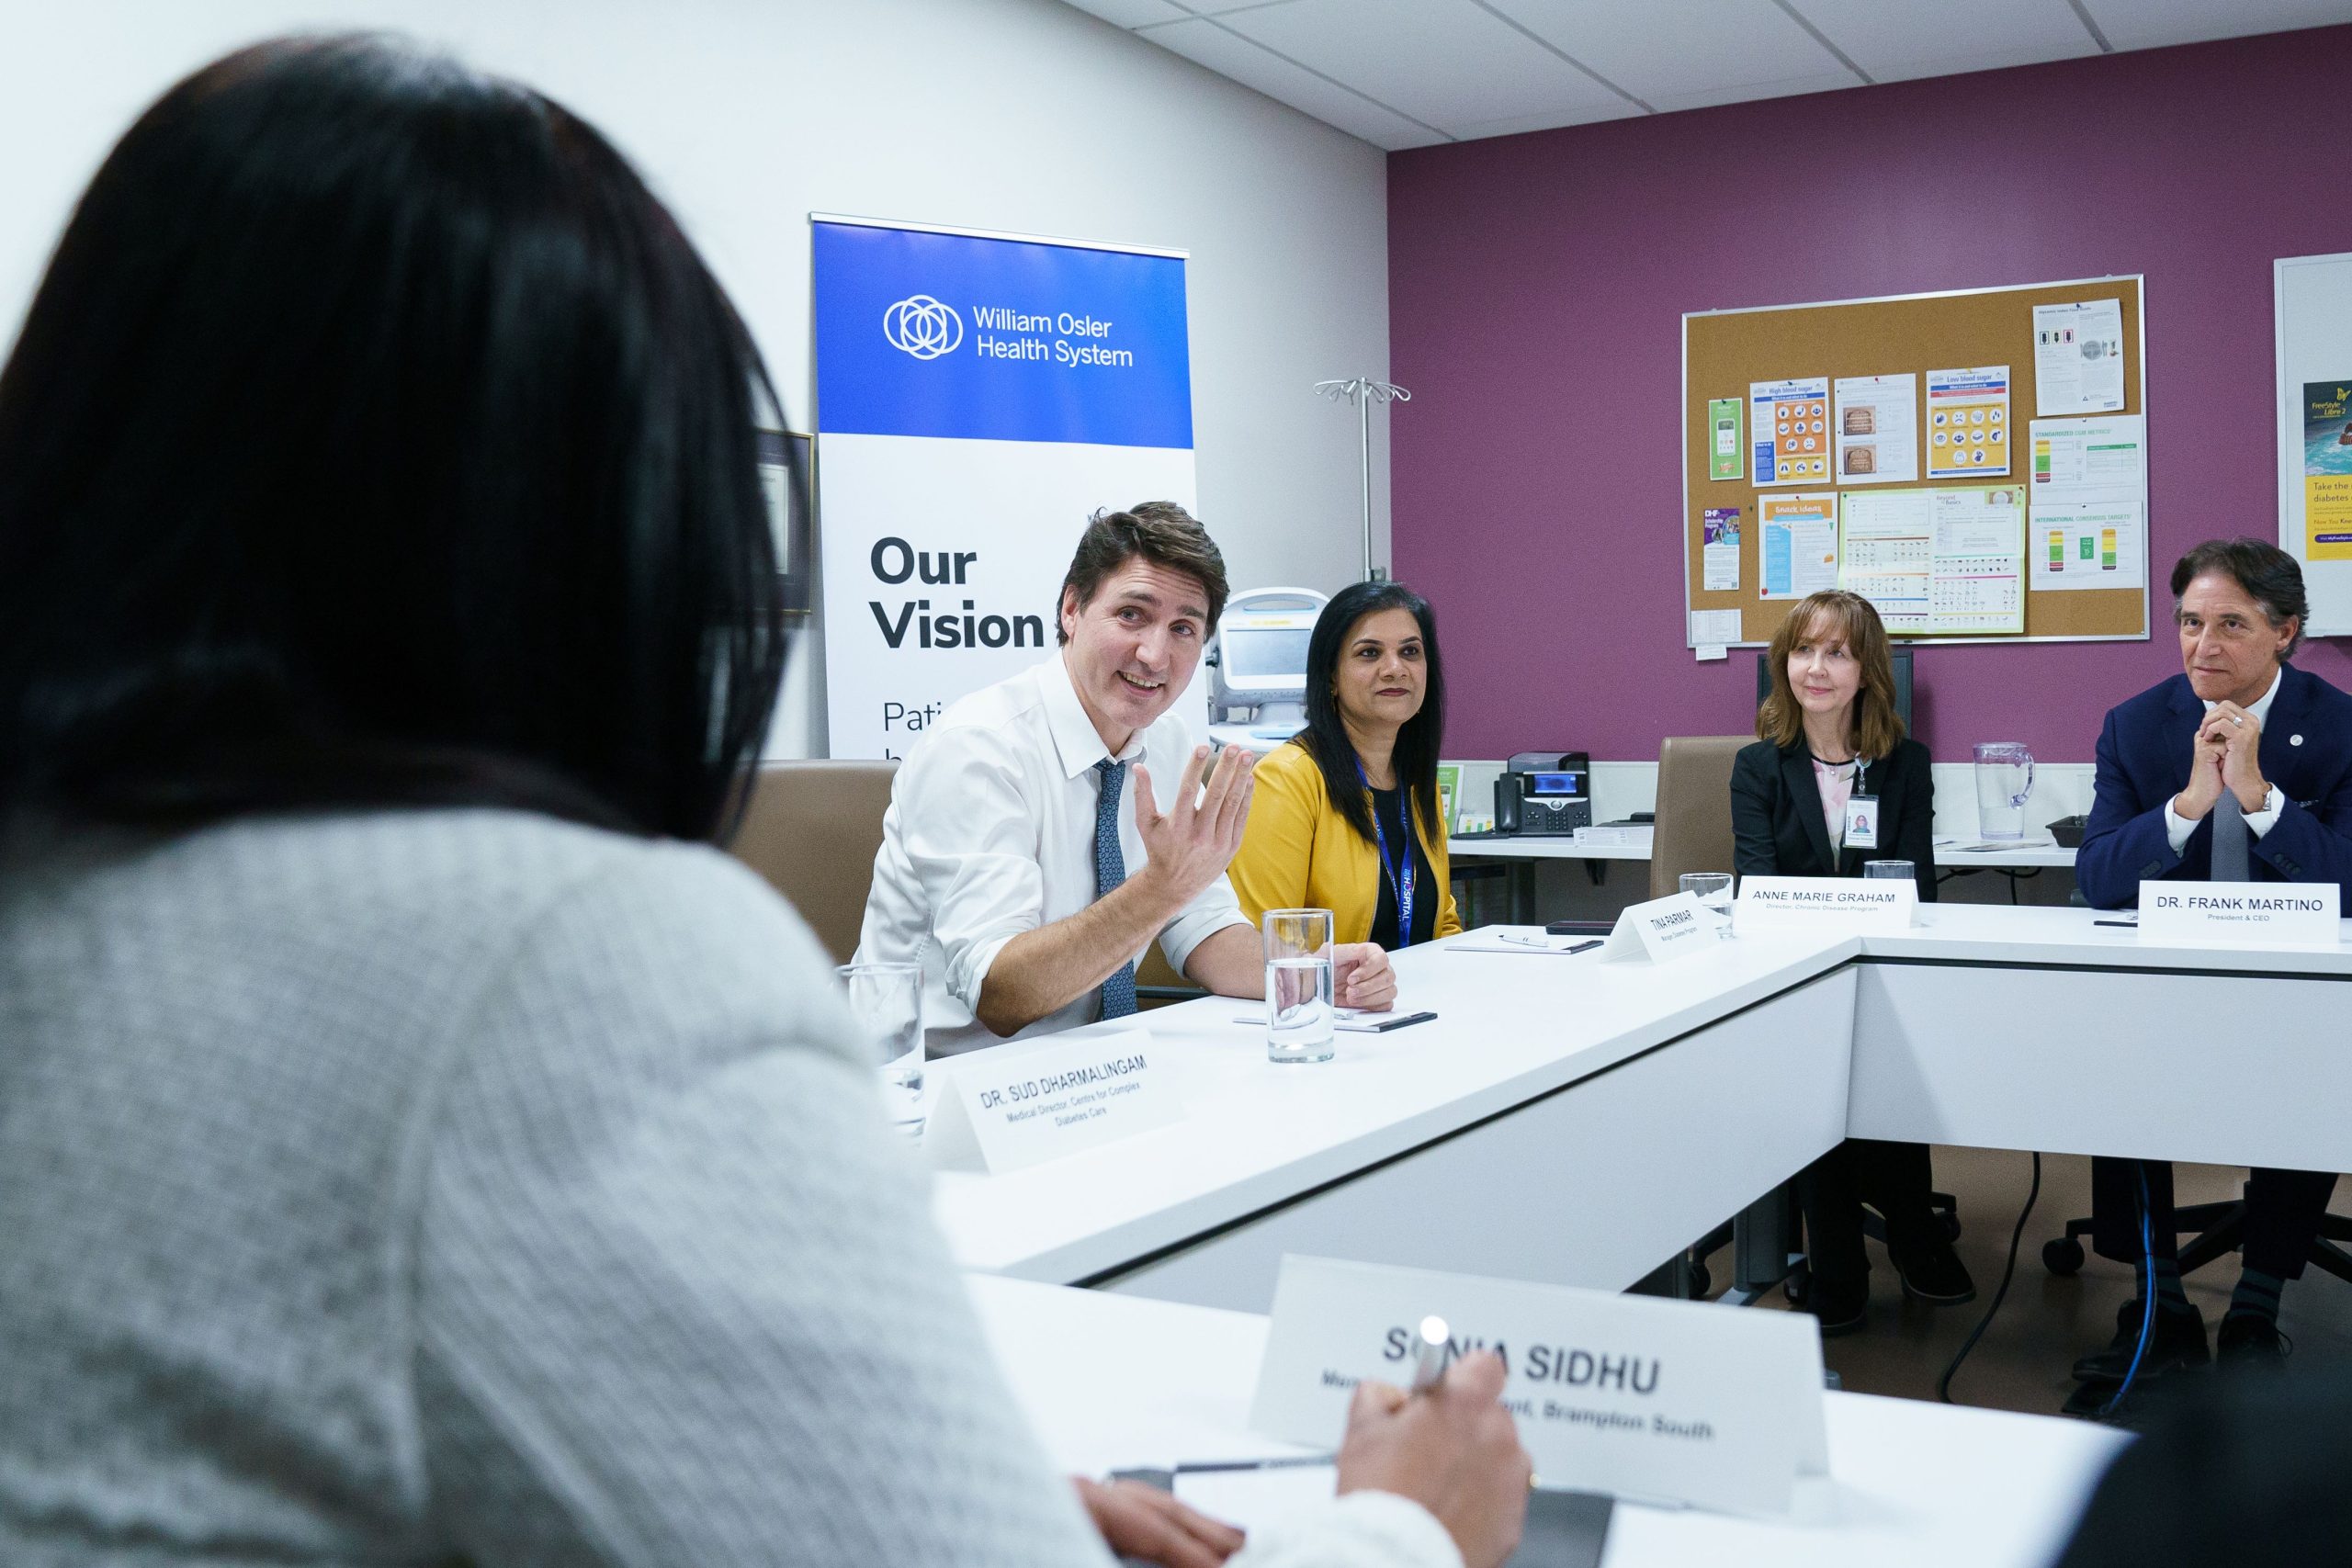 Prime Minister Justin Trudeau and Brampton MP Sonia Sidhu stopped at Brampton’s Peel Memorial Centre on March 7, 2024. (Photo: William Osler Health System)